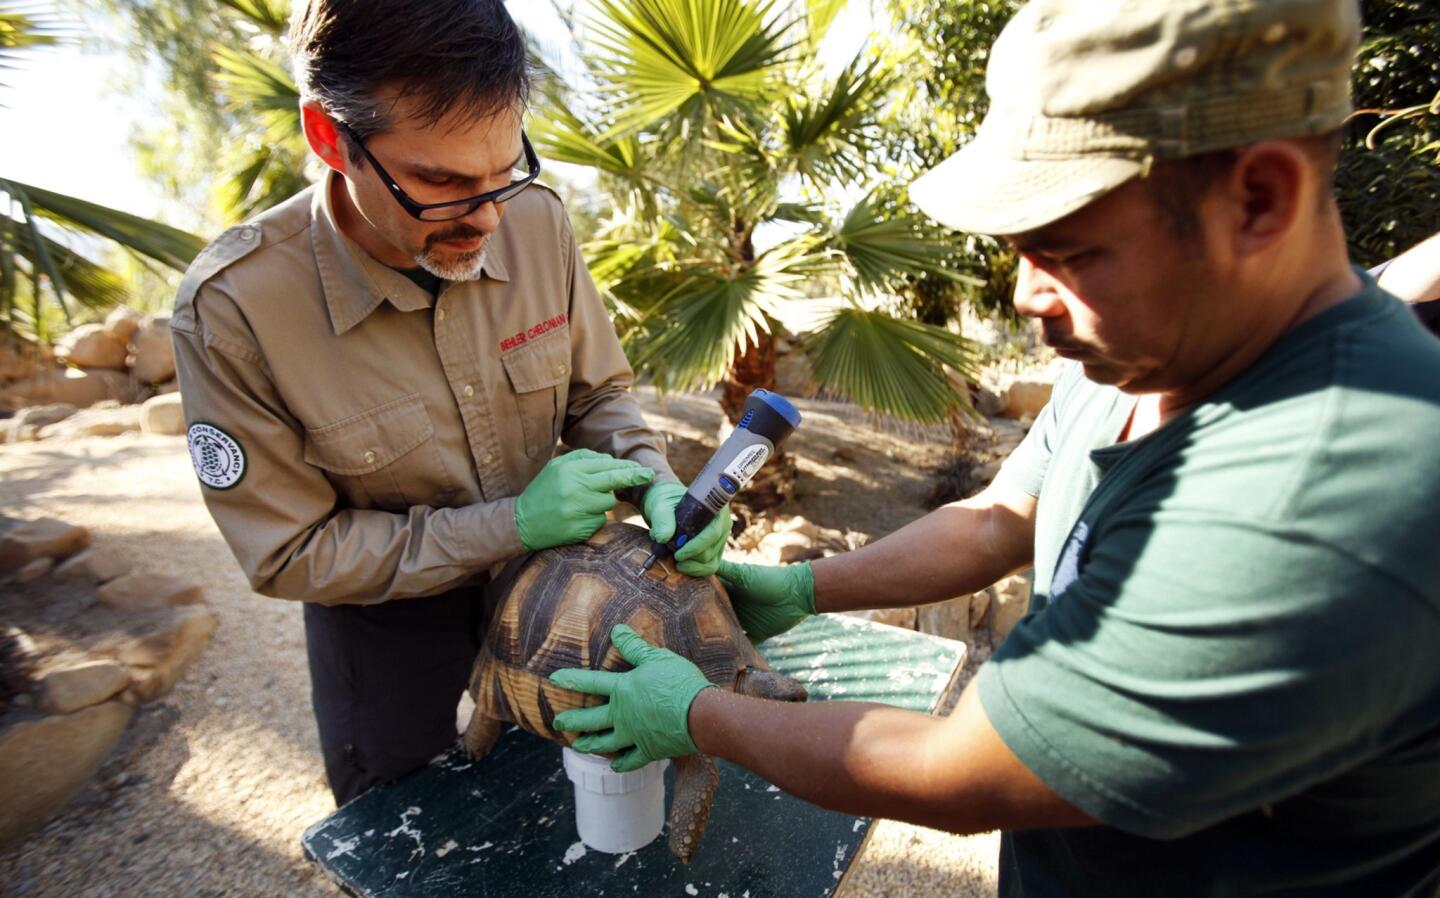 Paul Gibbons and Armando Jimenez of the Behler Chelonian Center use a drill tool to etch a code onto the shells of two ploughshare tortoises to reduce the risk that they'll be stolen by poachers.